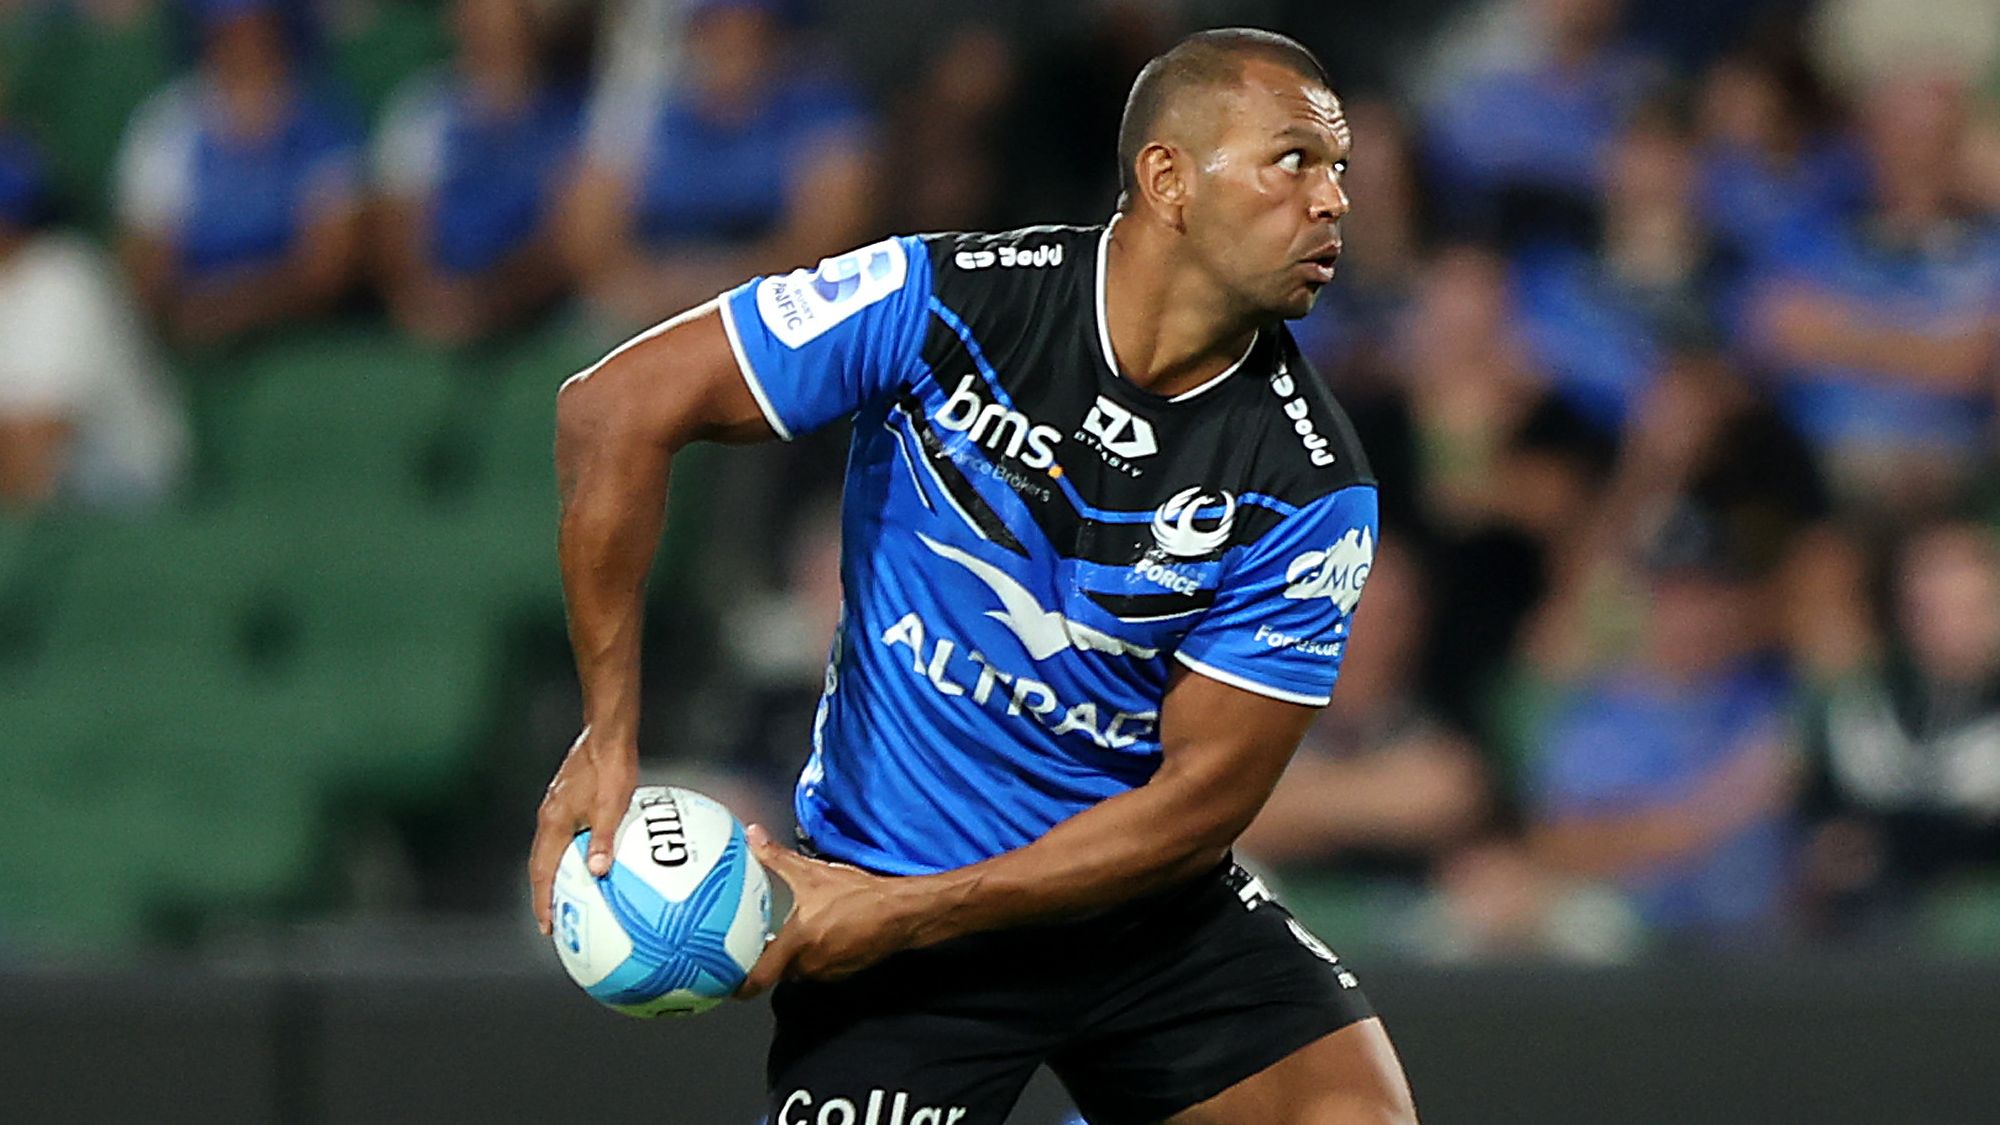 Kurtley Beale of the Force passes the ball.